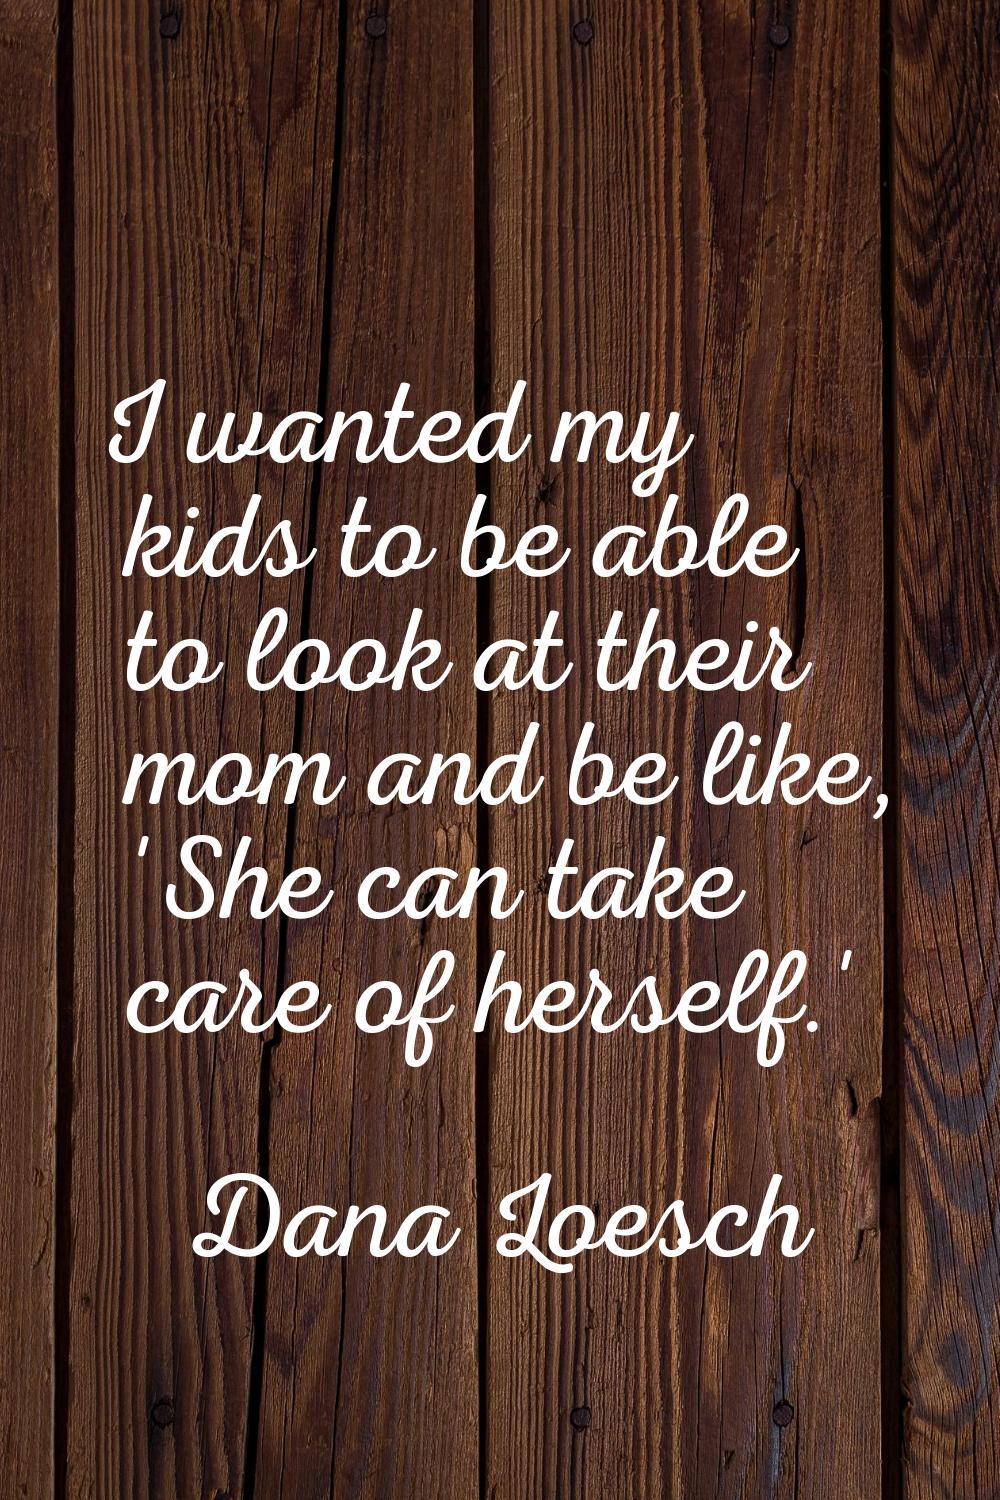 I wanted my kids to be able to look at their mom and be like, 'She can take care of herself.'